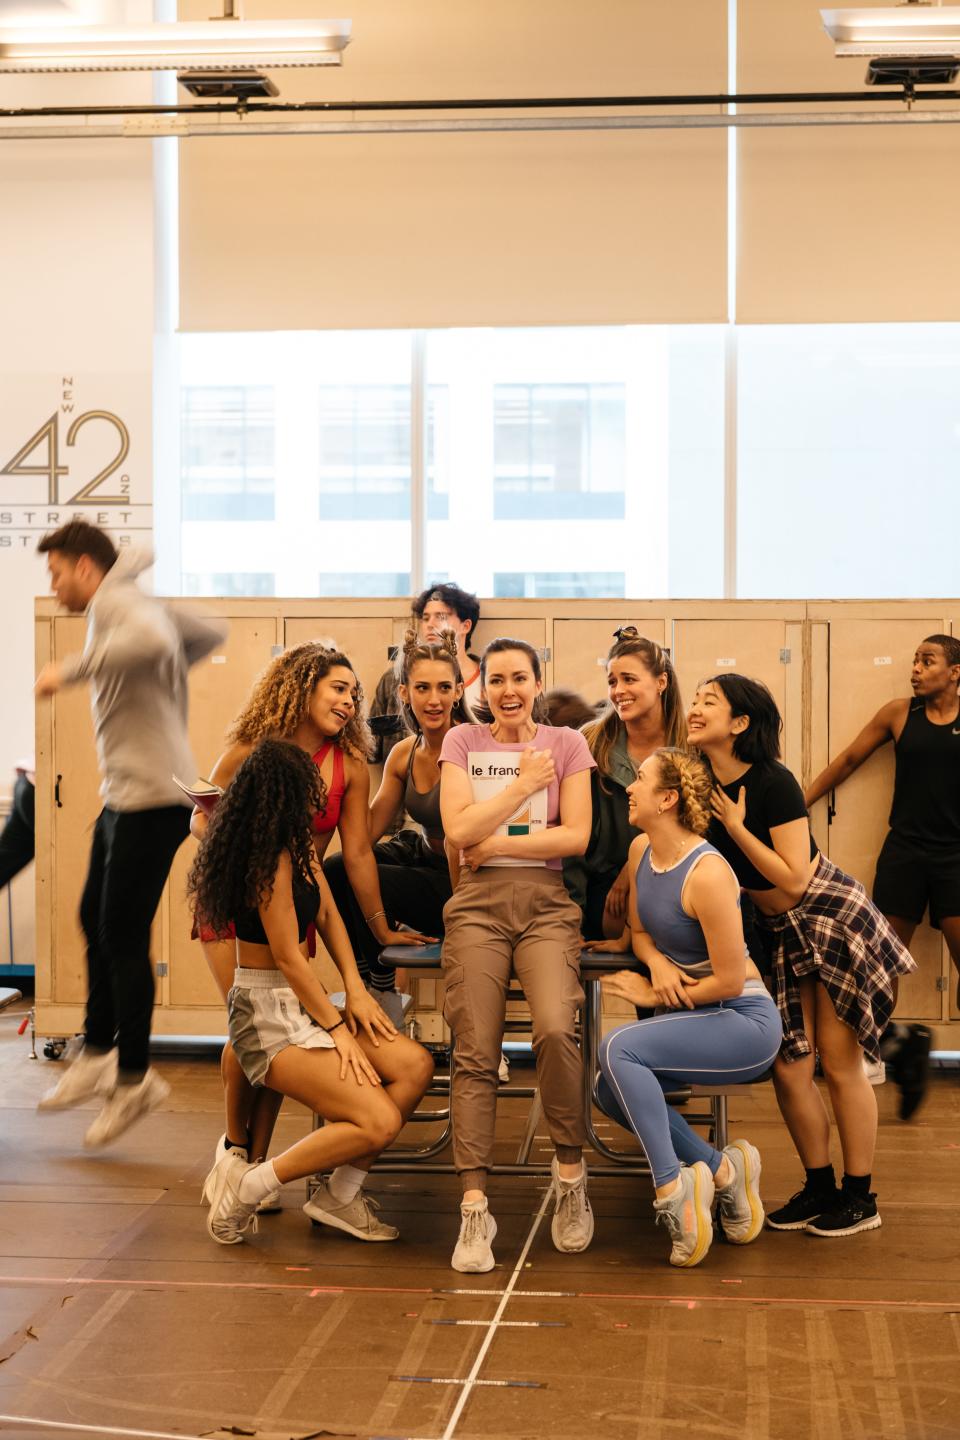 Liana Hunt, center, of Morrisville, rehearses at New 42 Studios in Manhattan for her role as Lorraine Baines McFly in "Back to the Future: The Musical."